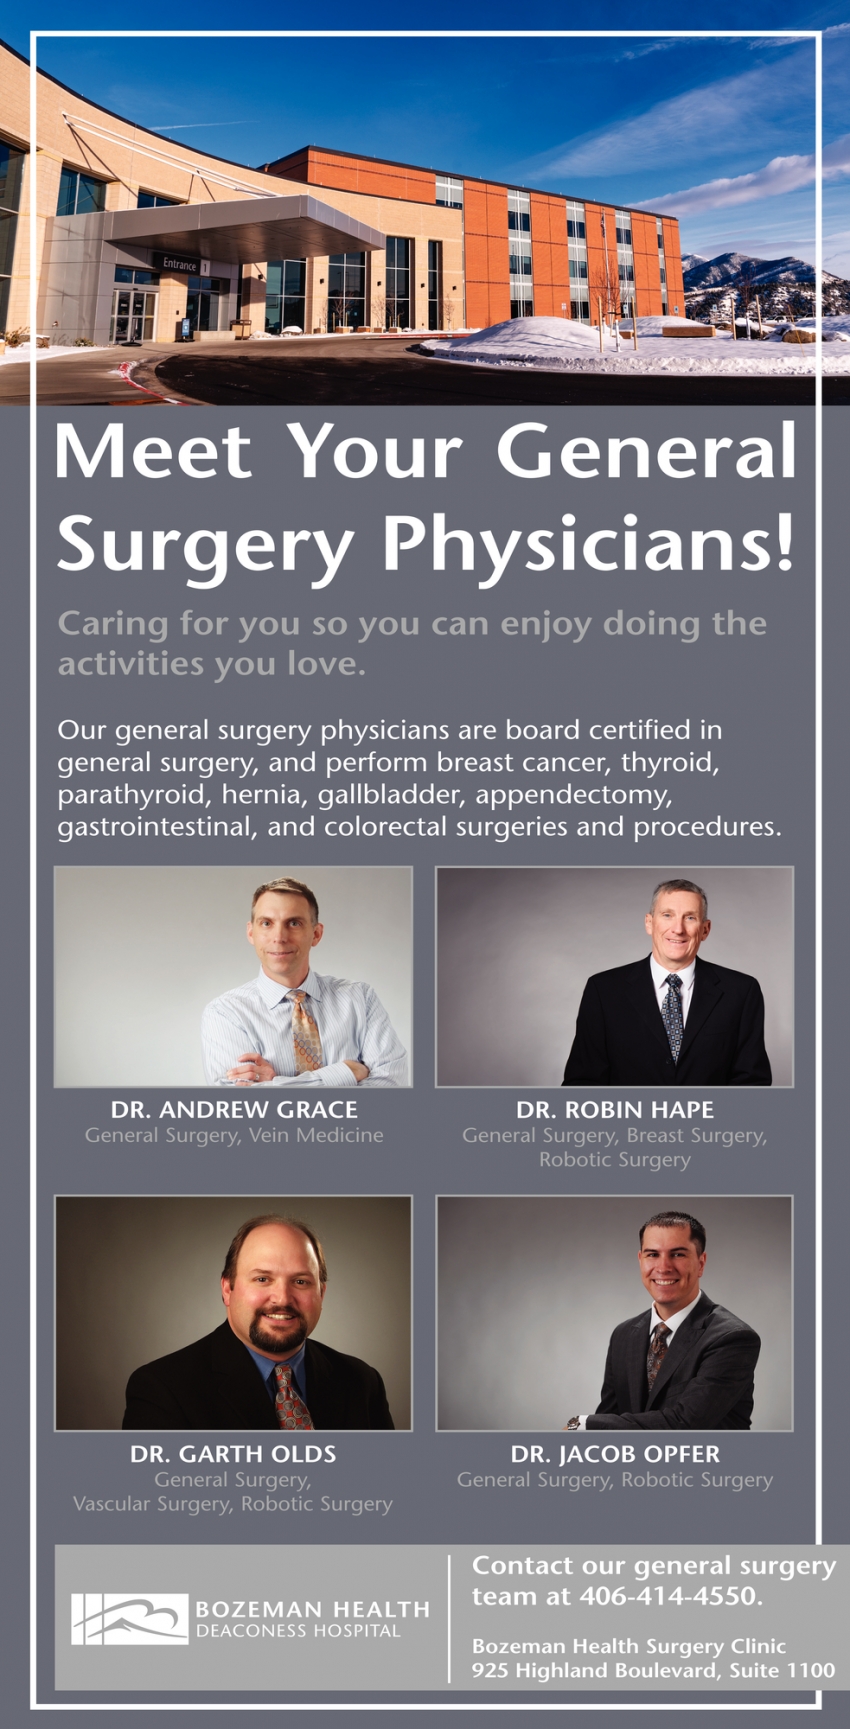 Meet Your General Surgery Physicians!